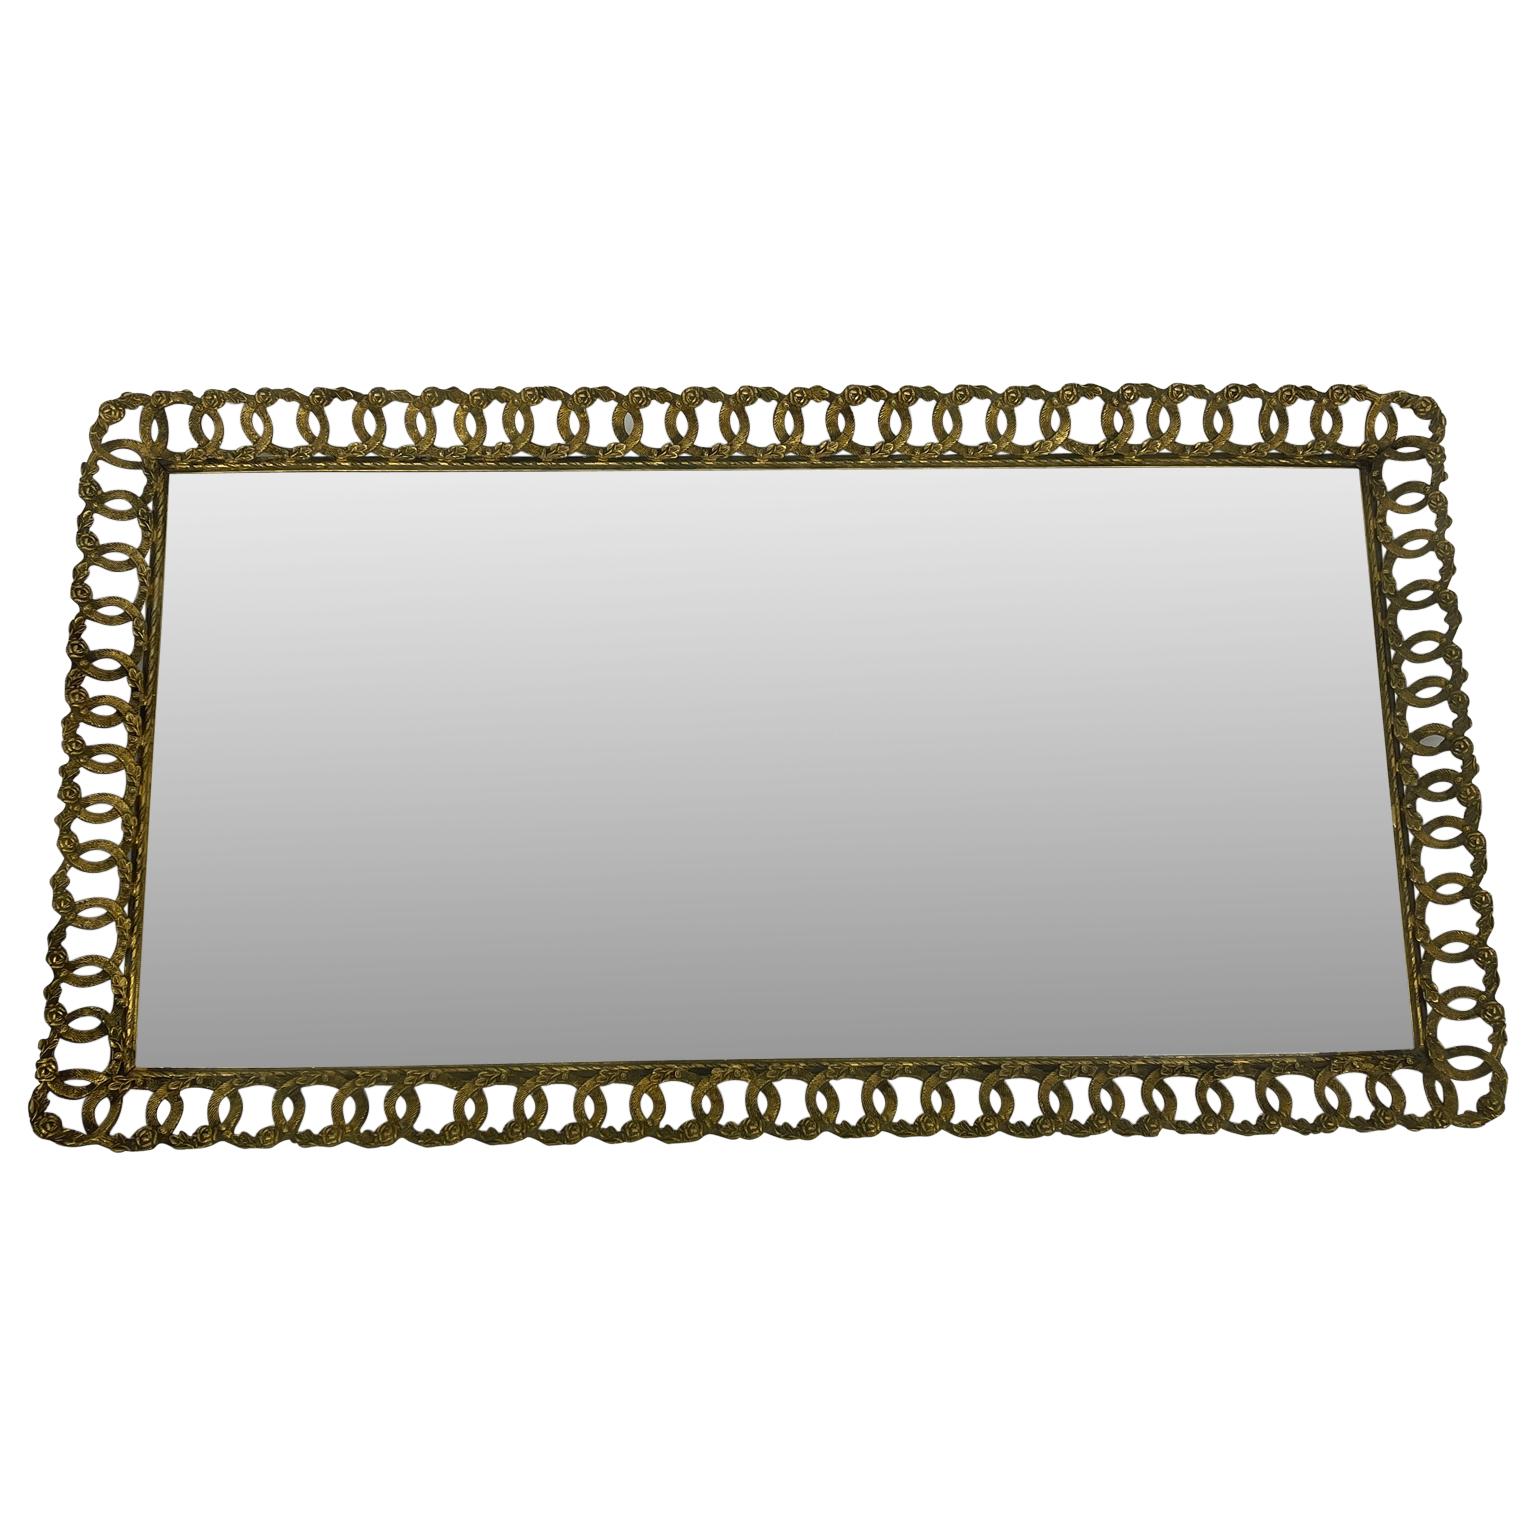 Gilt Hollywood Regency Gilded Mirrored Serving Tray with Filigree Design